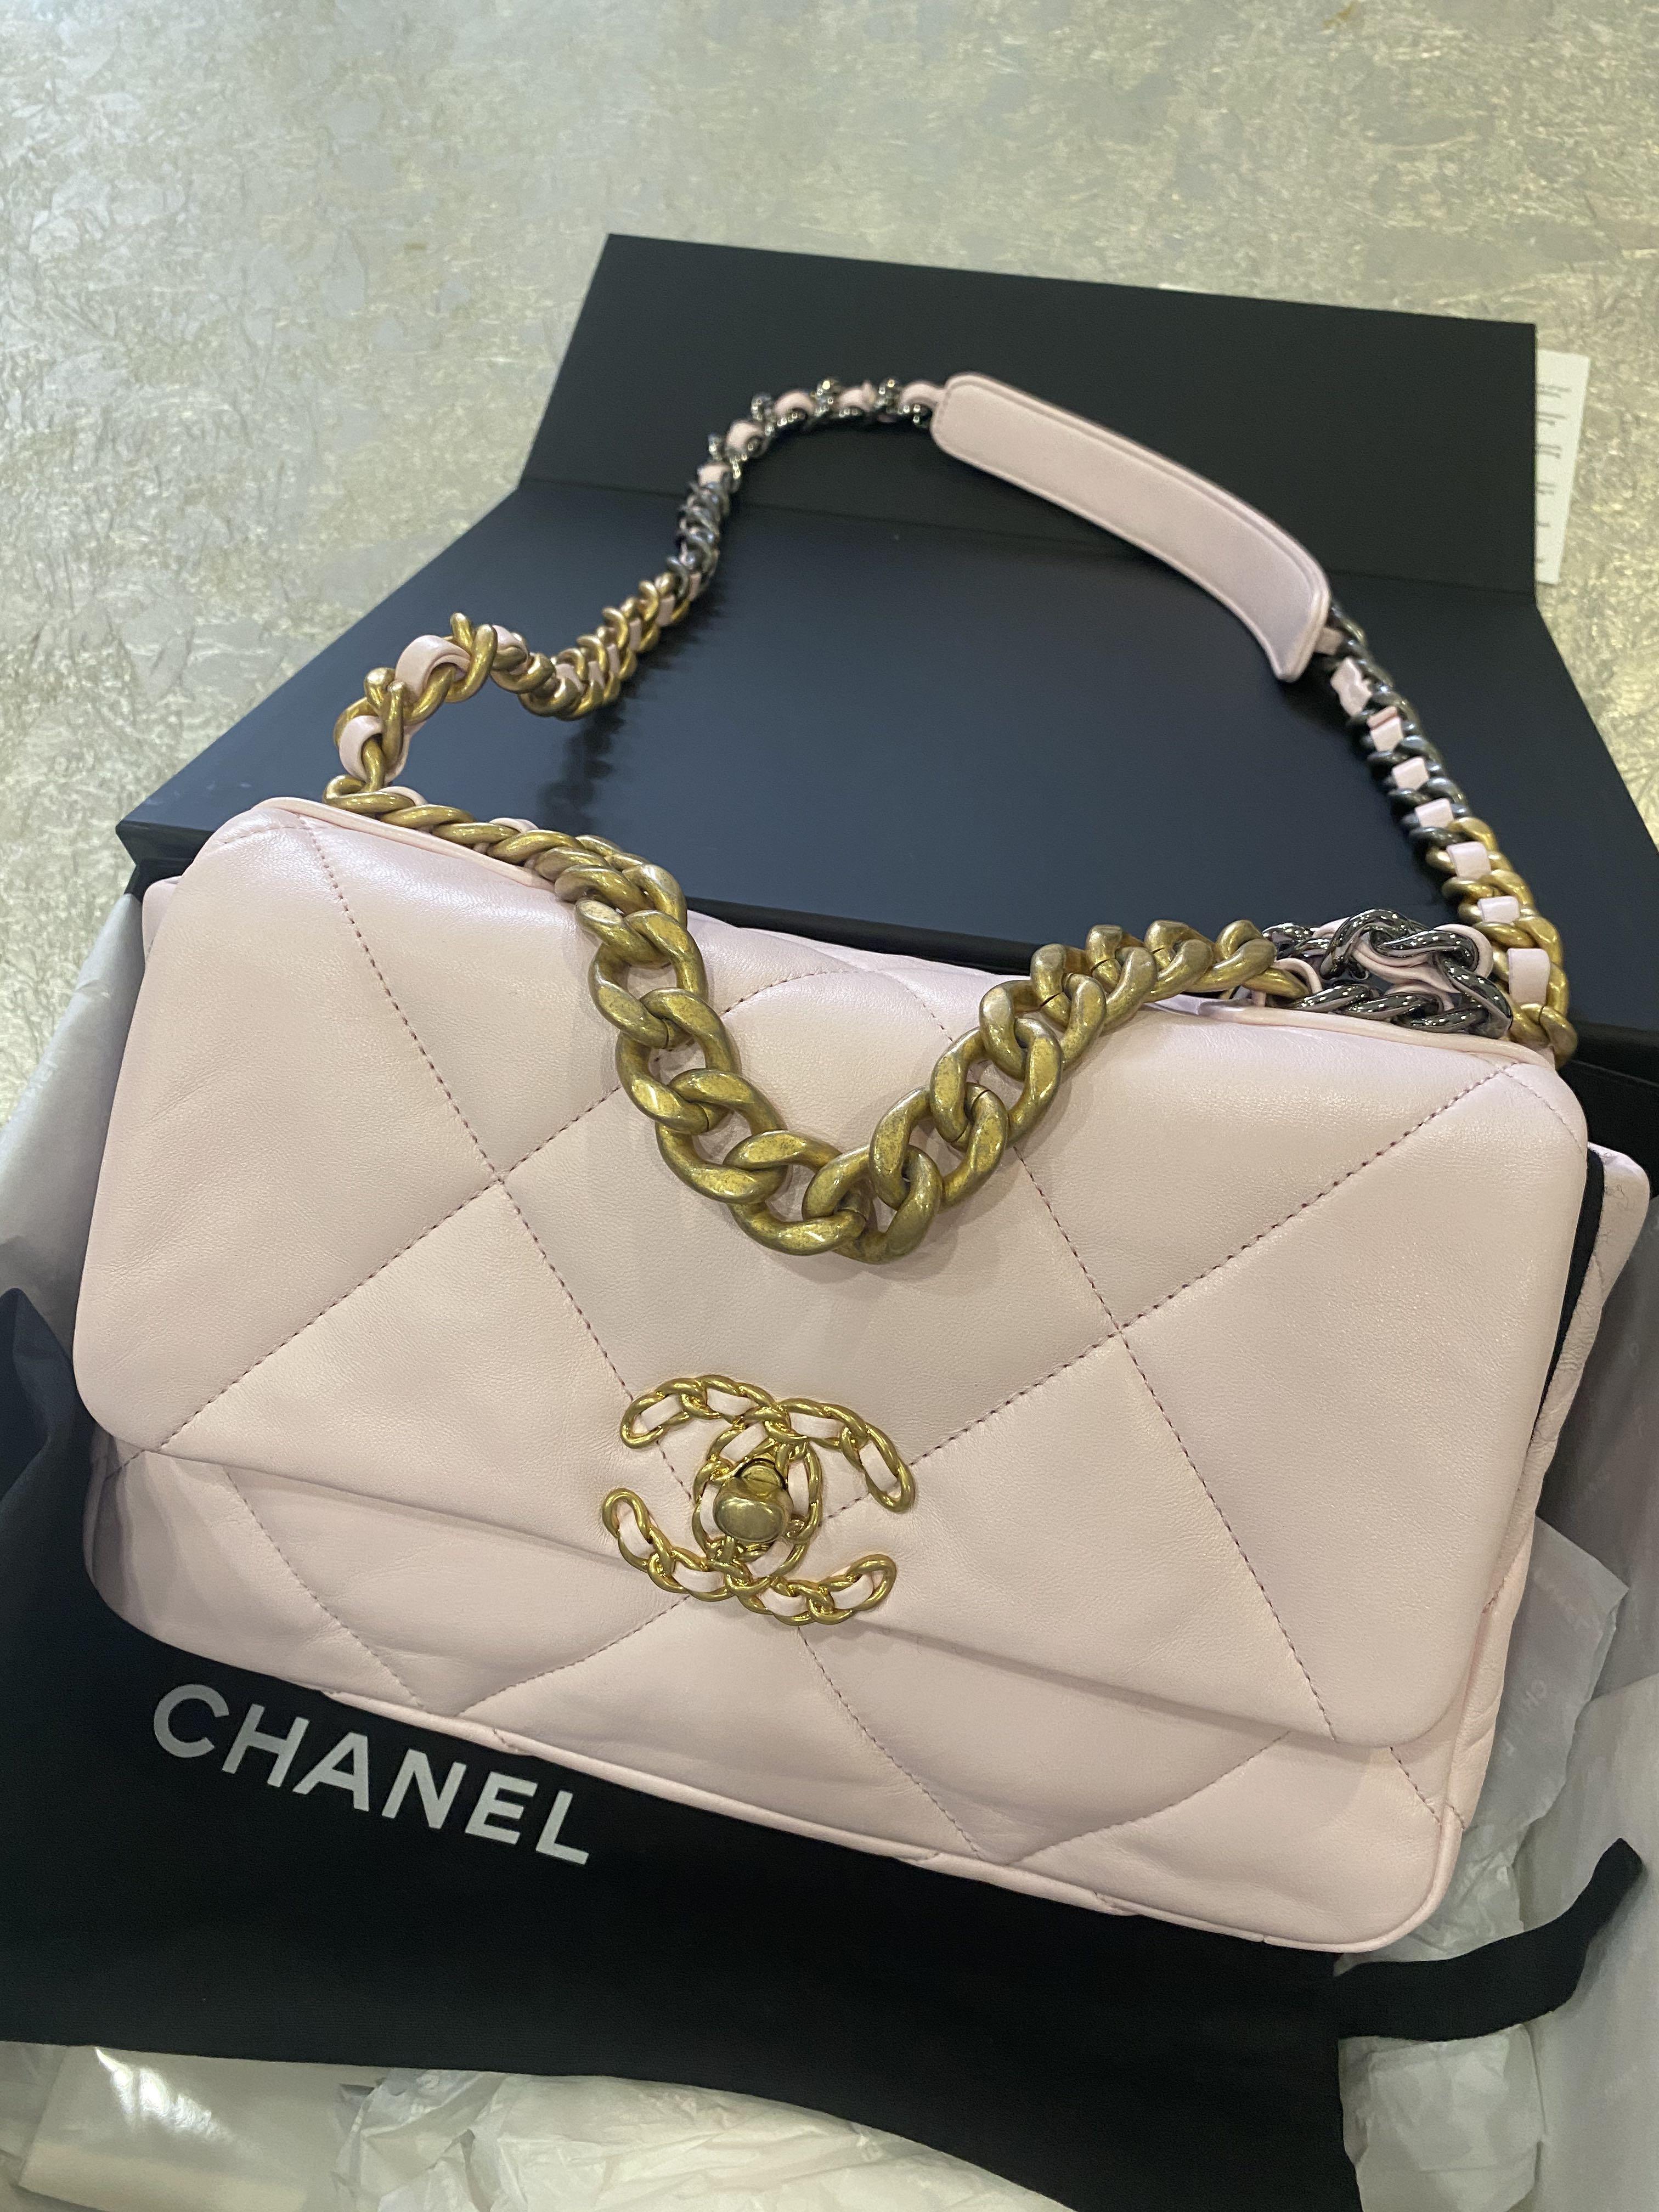 ❗️INSTOCk❗️CHANEL 22P Pink 19 Small Flap GHW